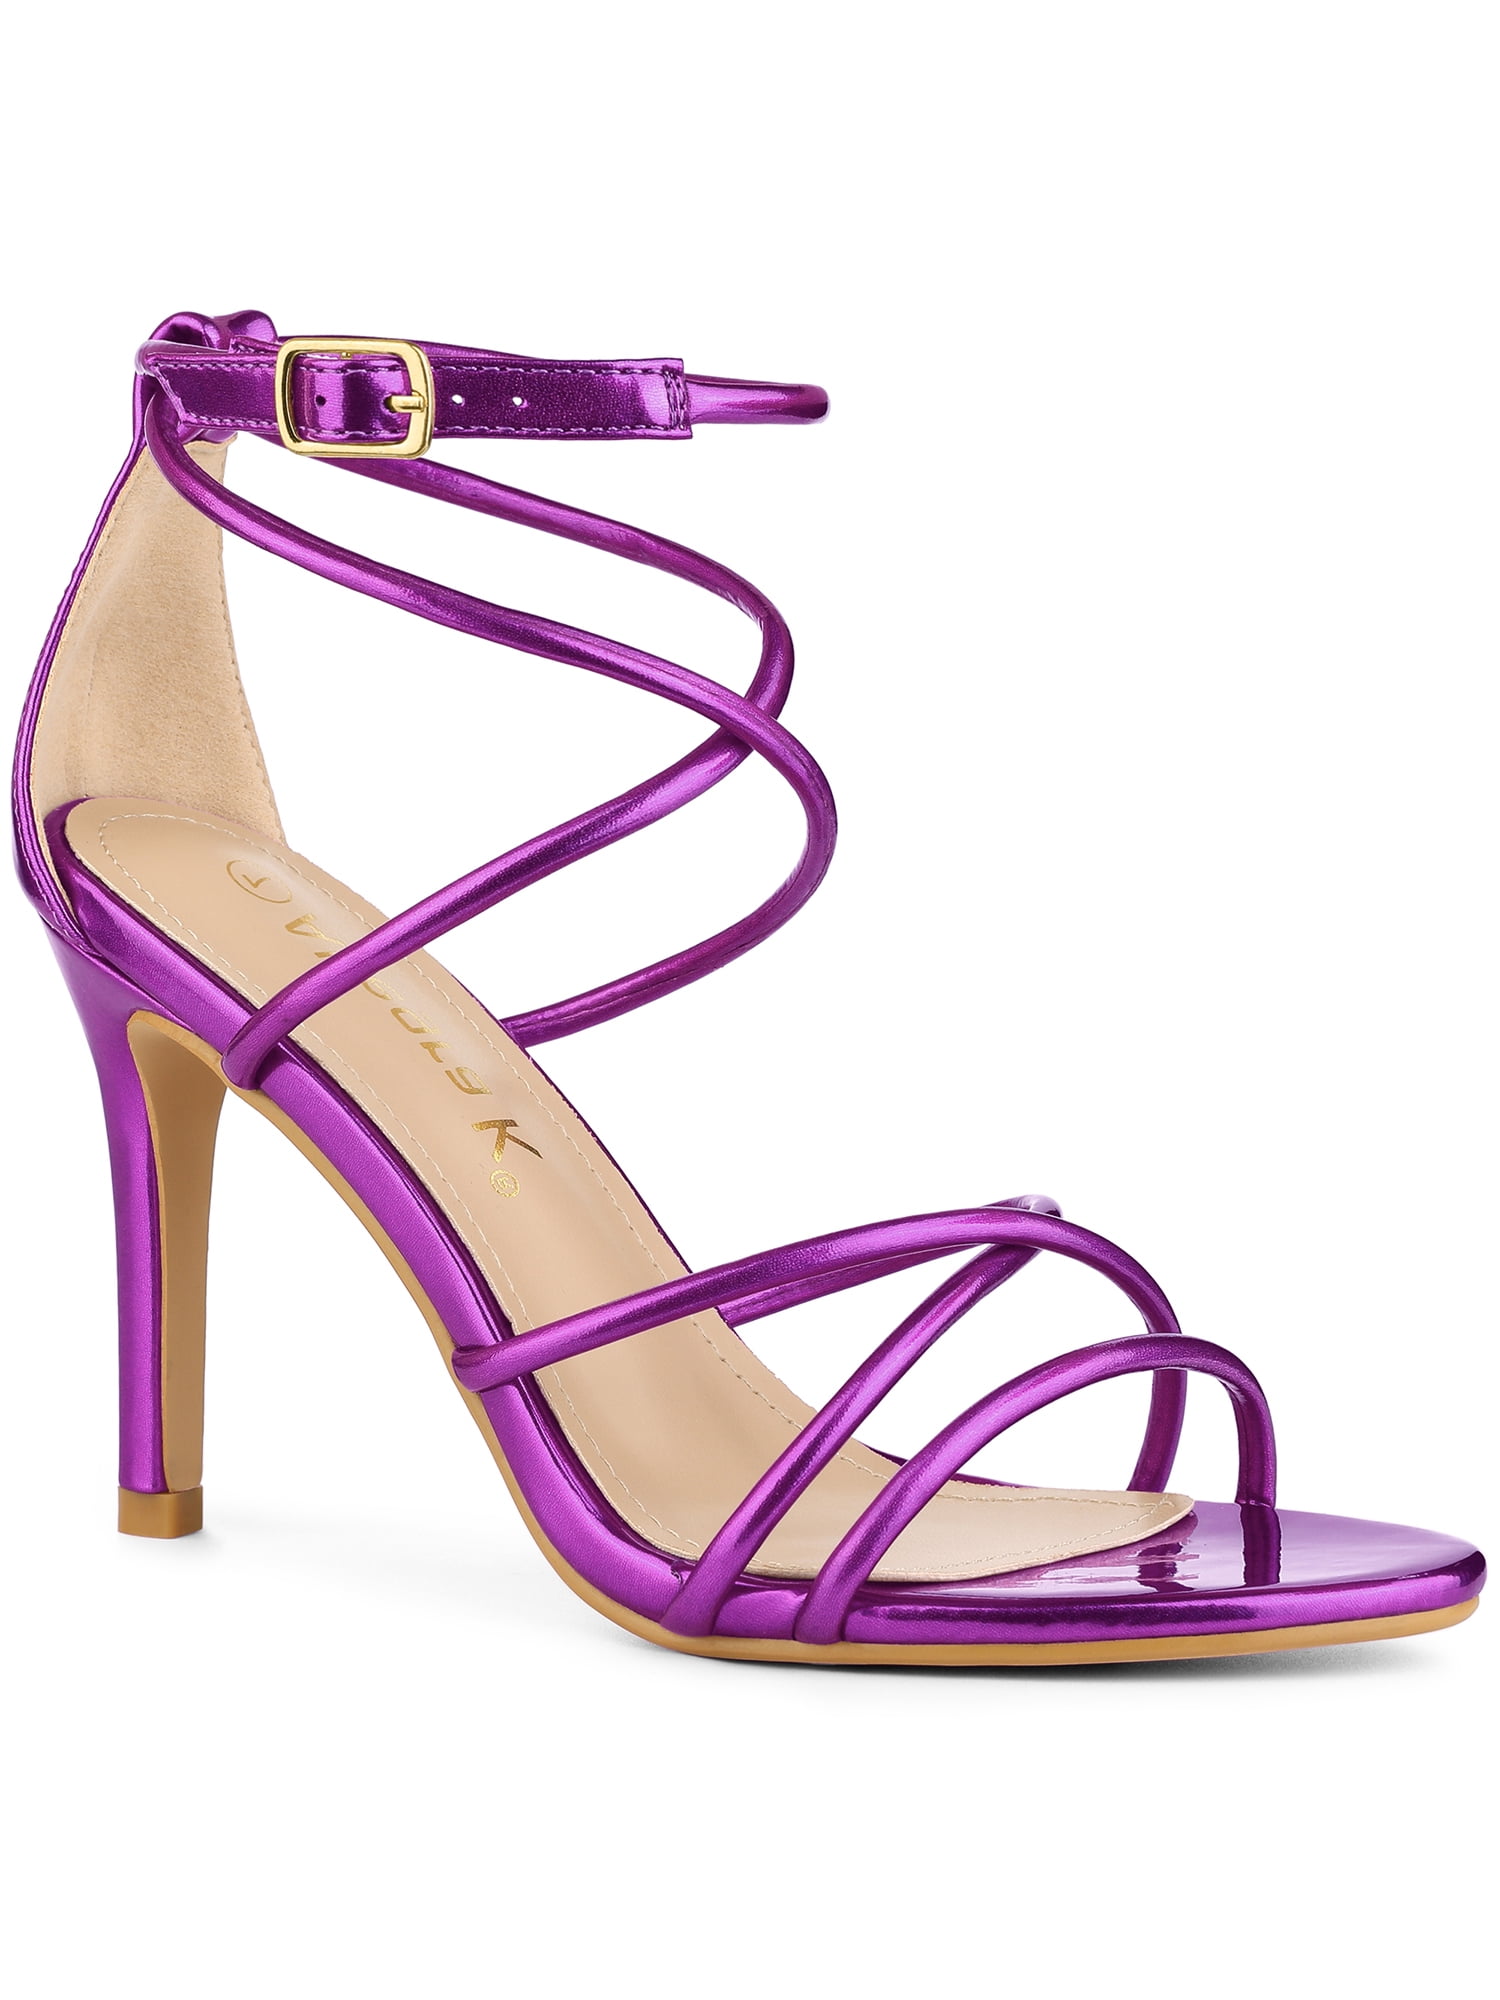 Womens Pointed Open Toe Stiletto Heeled Sandals,Rhinestone Ankle Strap High  Heels Pumps Prom Dress Court Shoes (Purple 1 6.5 UK) : Amazon.com.au:  Clothing, Shoes & Accessories